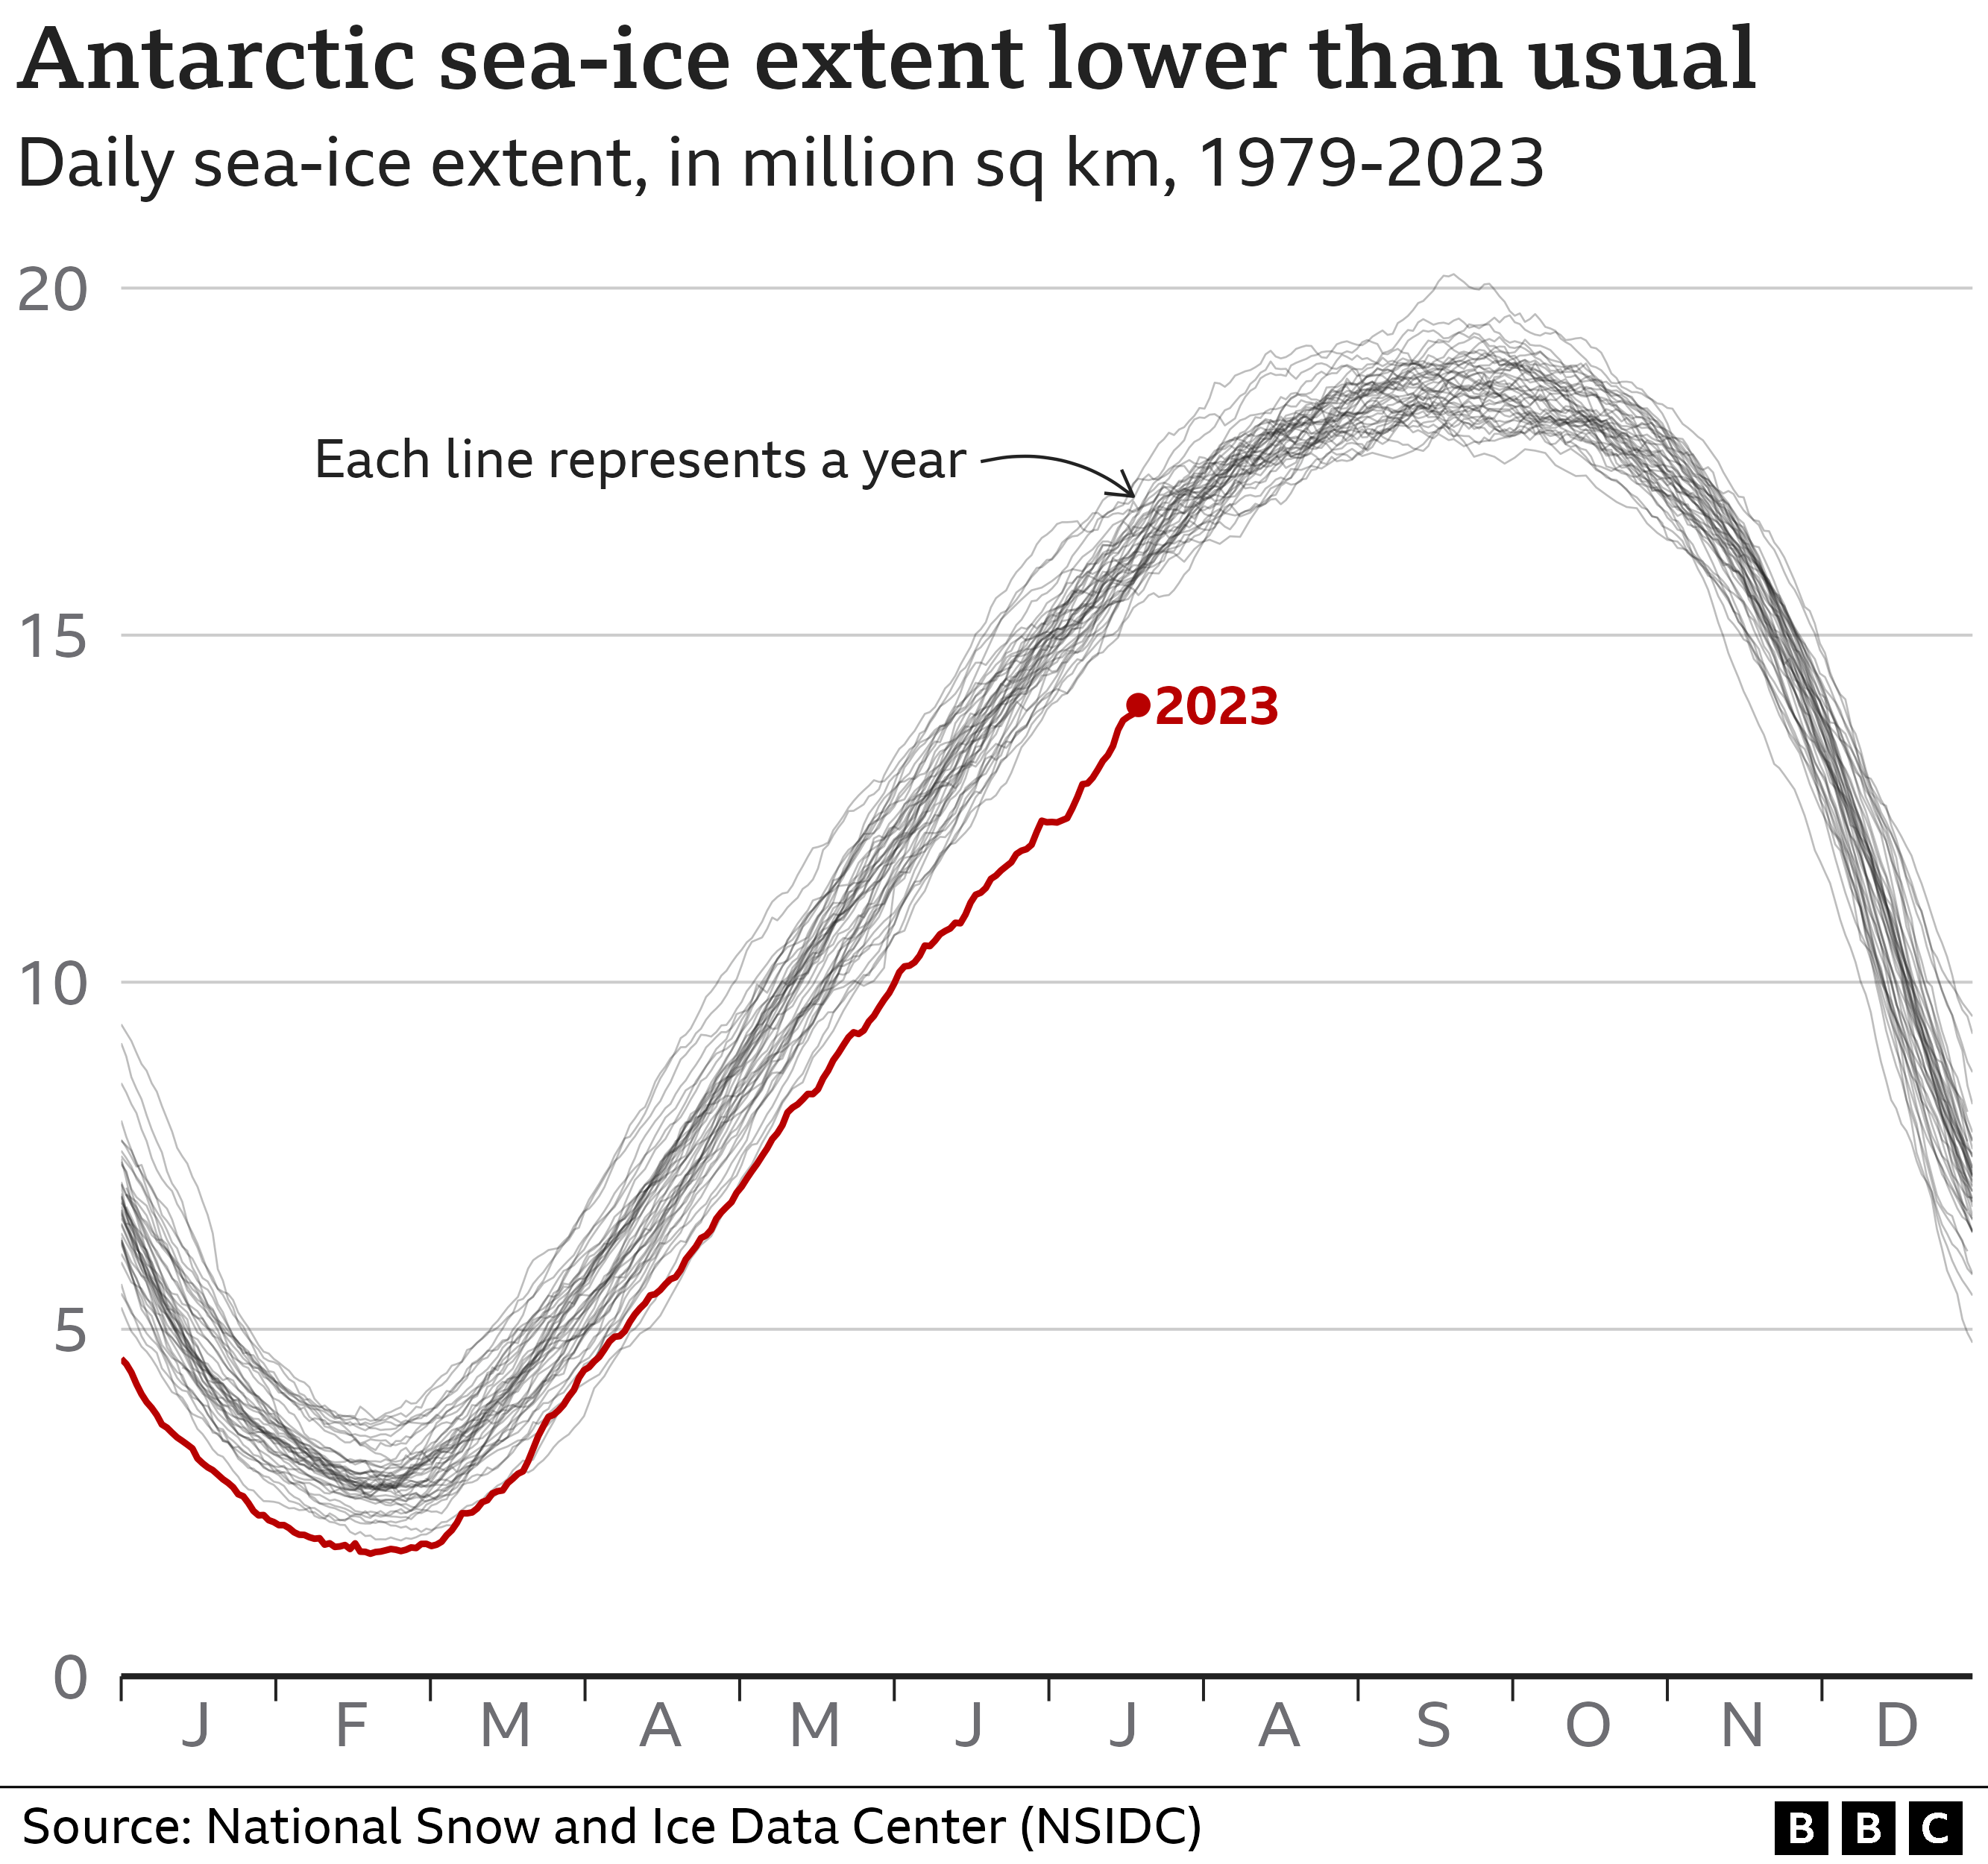 Multiple line chart showing daily Antarctic sea-ice extent, with a line for each year between 1979 and 2023. The 2023 line is well below the average extent for both June and July.